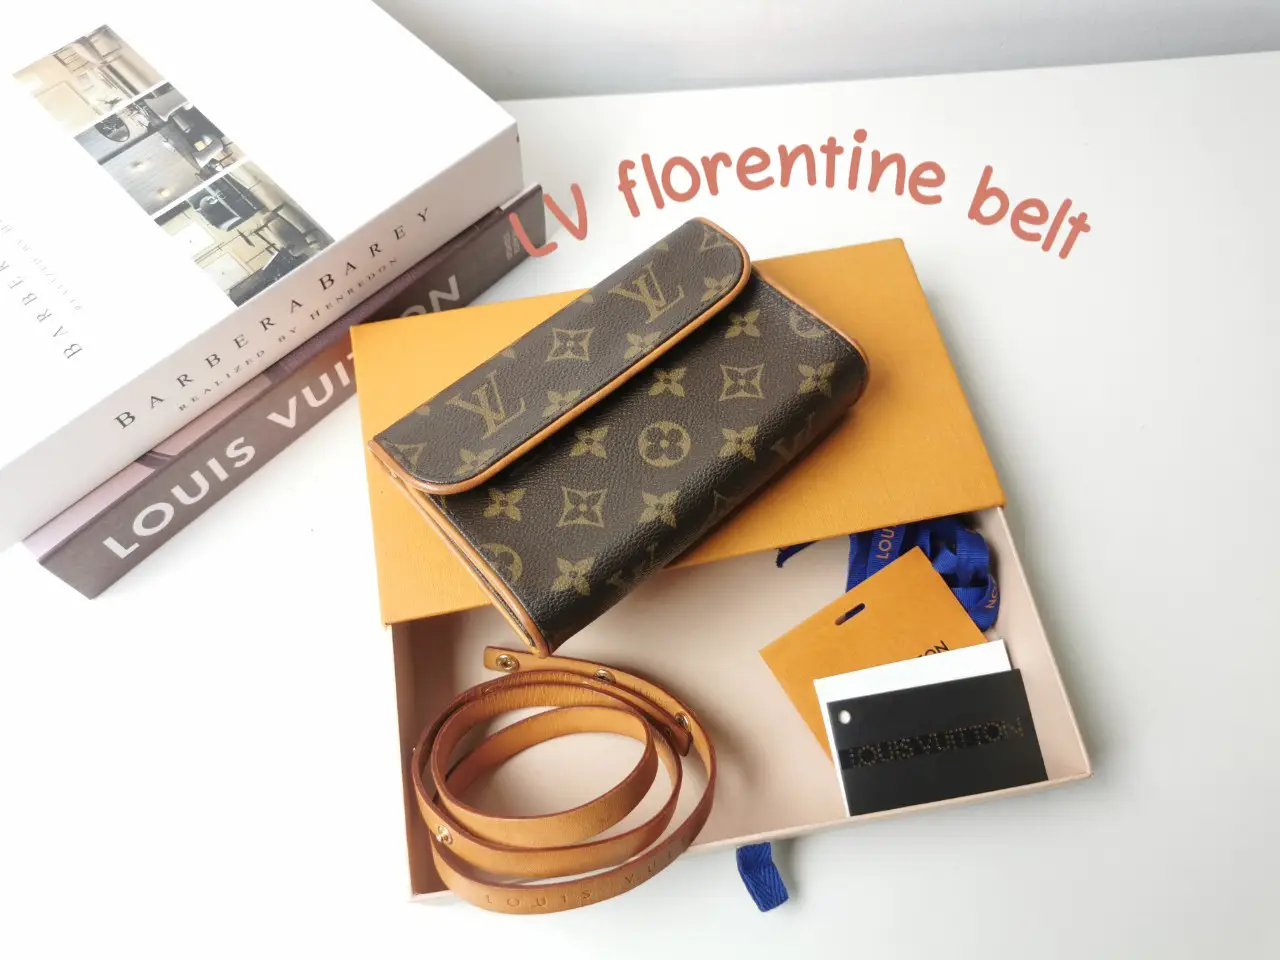 Elevate your fashion game with the Louis Vuitton Florentine belt bag!